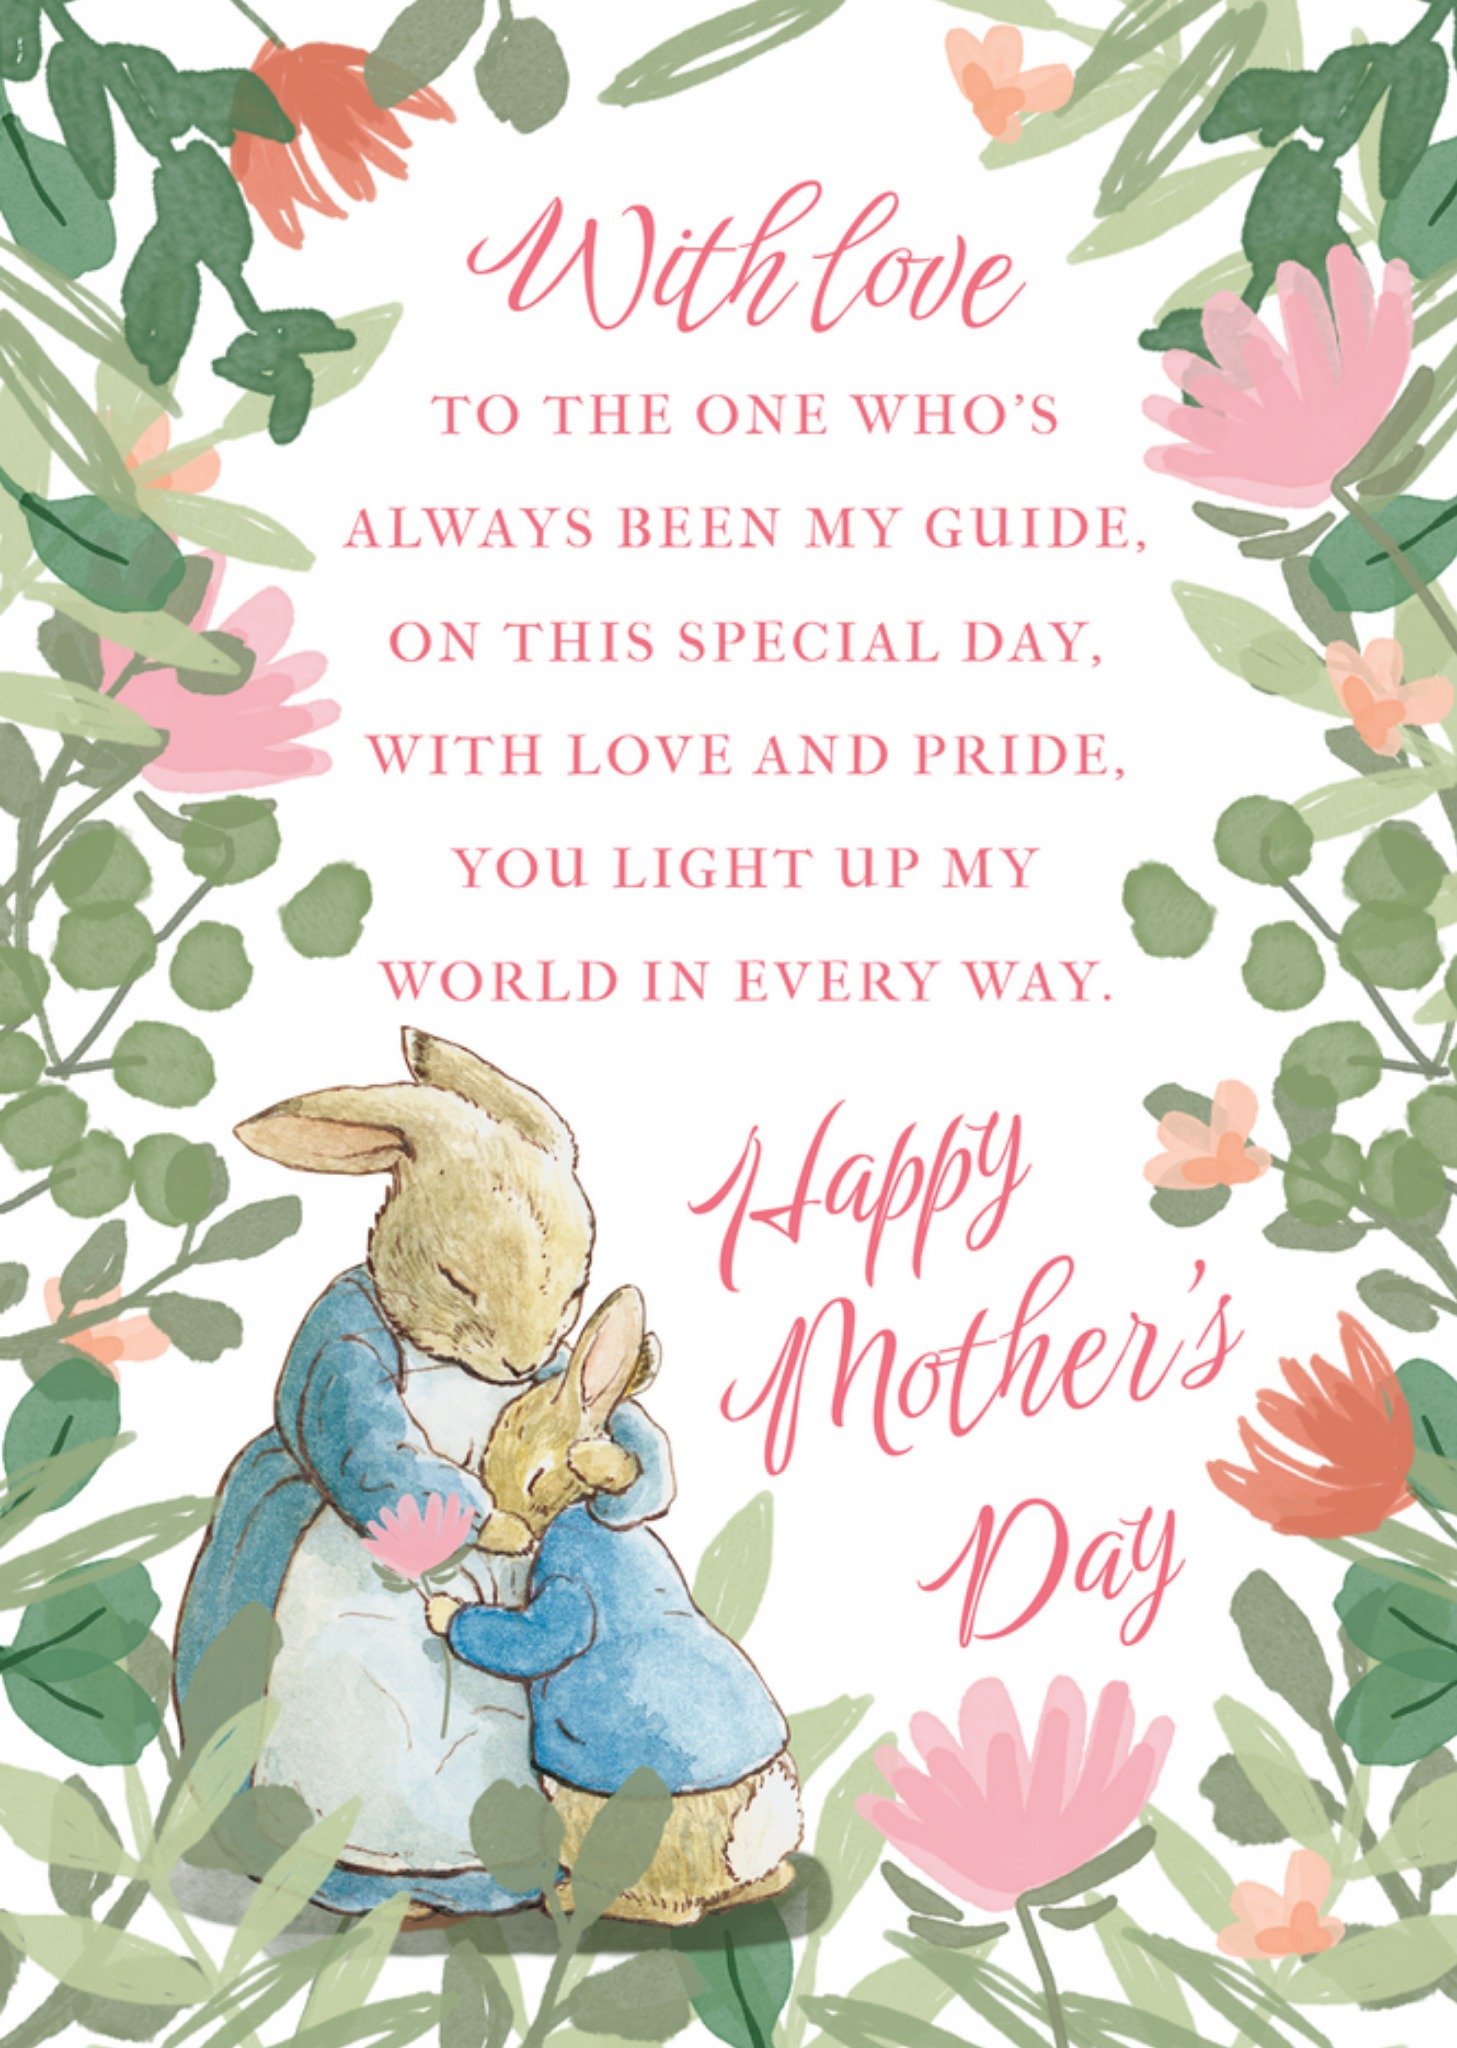 Beatrix Potter Peter Rabbit With Love To The One Who's Always Been My Guide Happy Mother's Day Card,